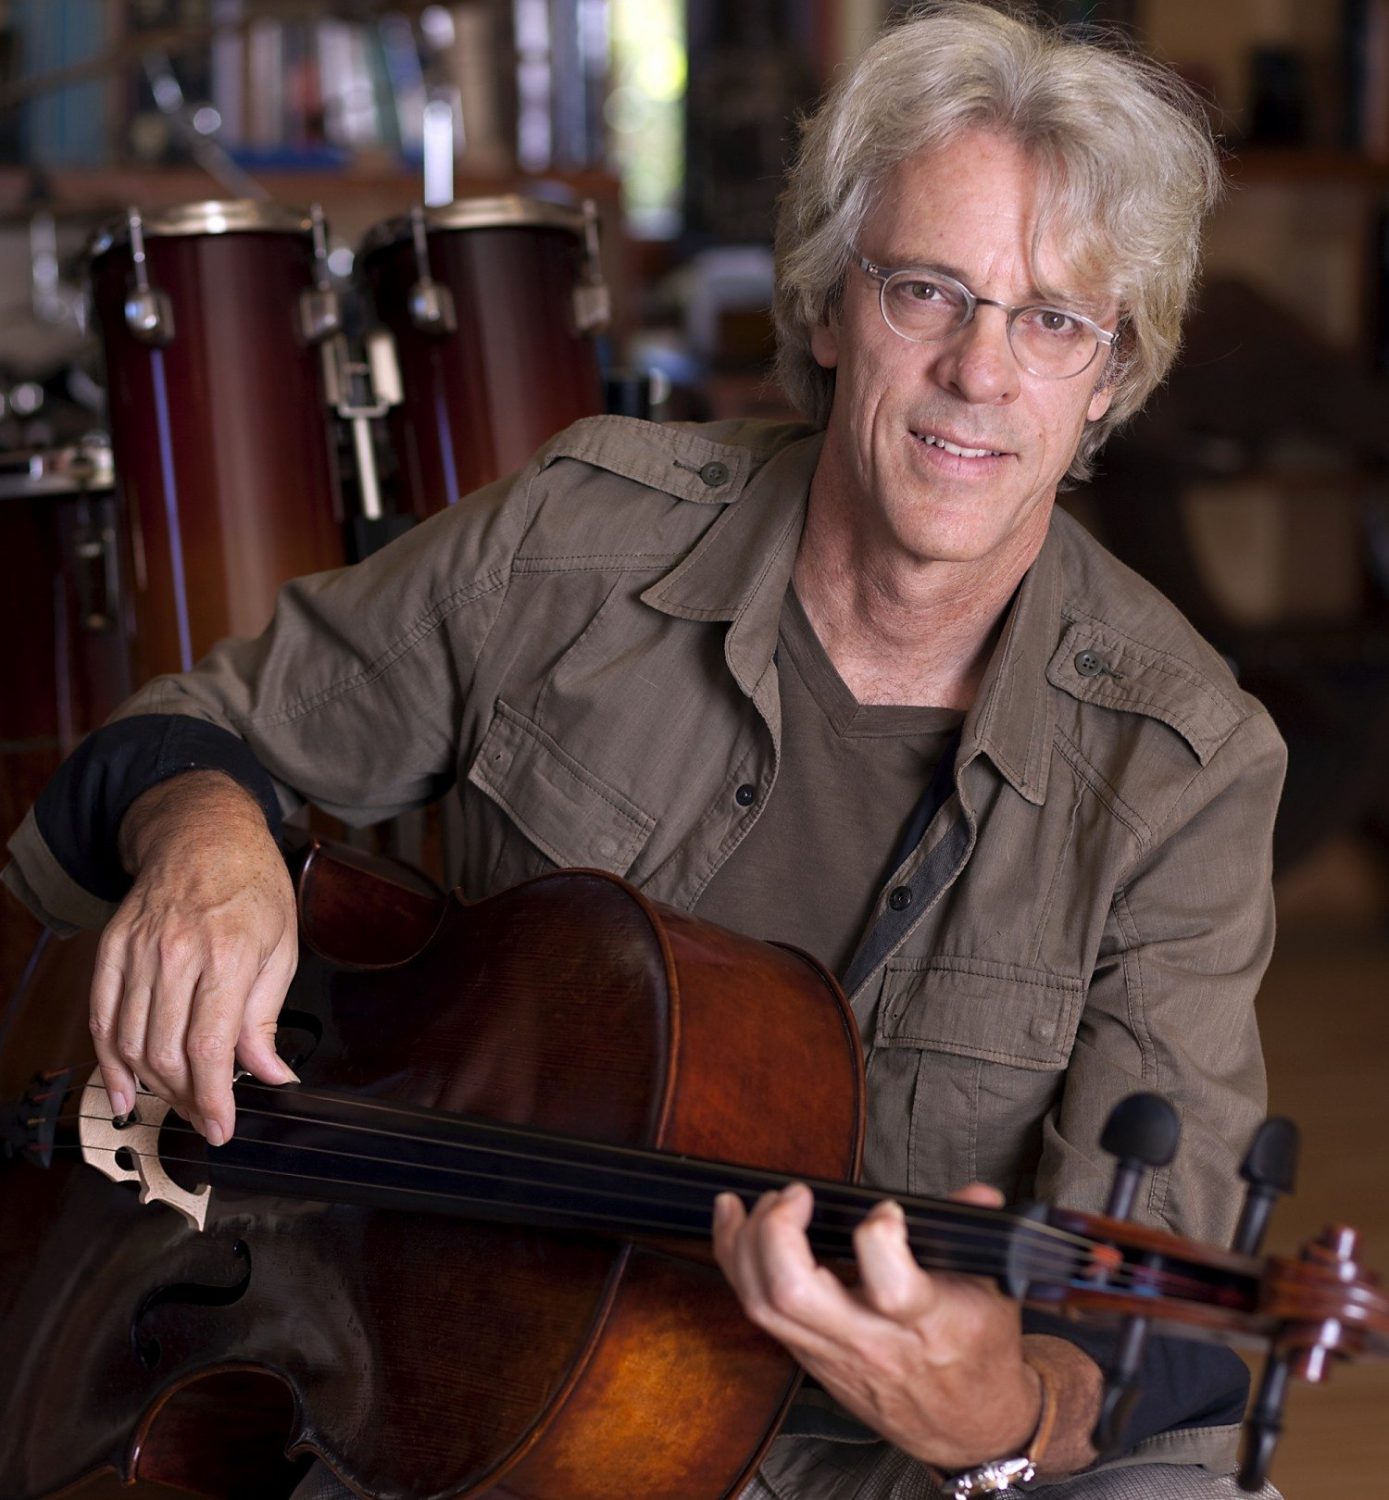 Stewart Copeland on His Improv Chamber Music Quintet in NYC April 8, plus Snoop Dogg, Getting the Gig, and Being a Rockstar in a Classical World